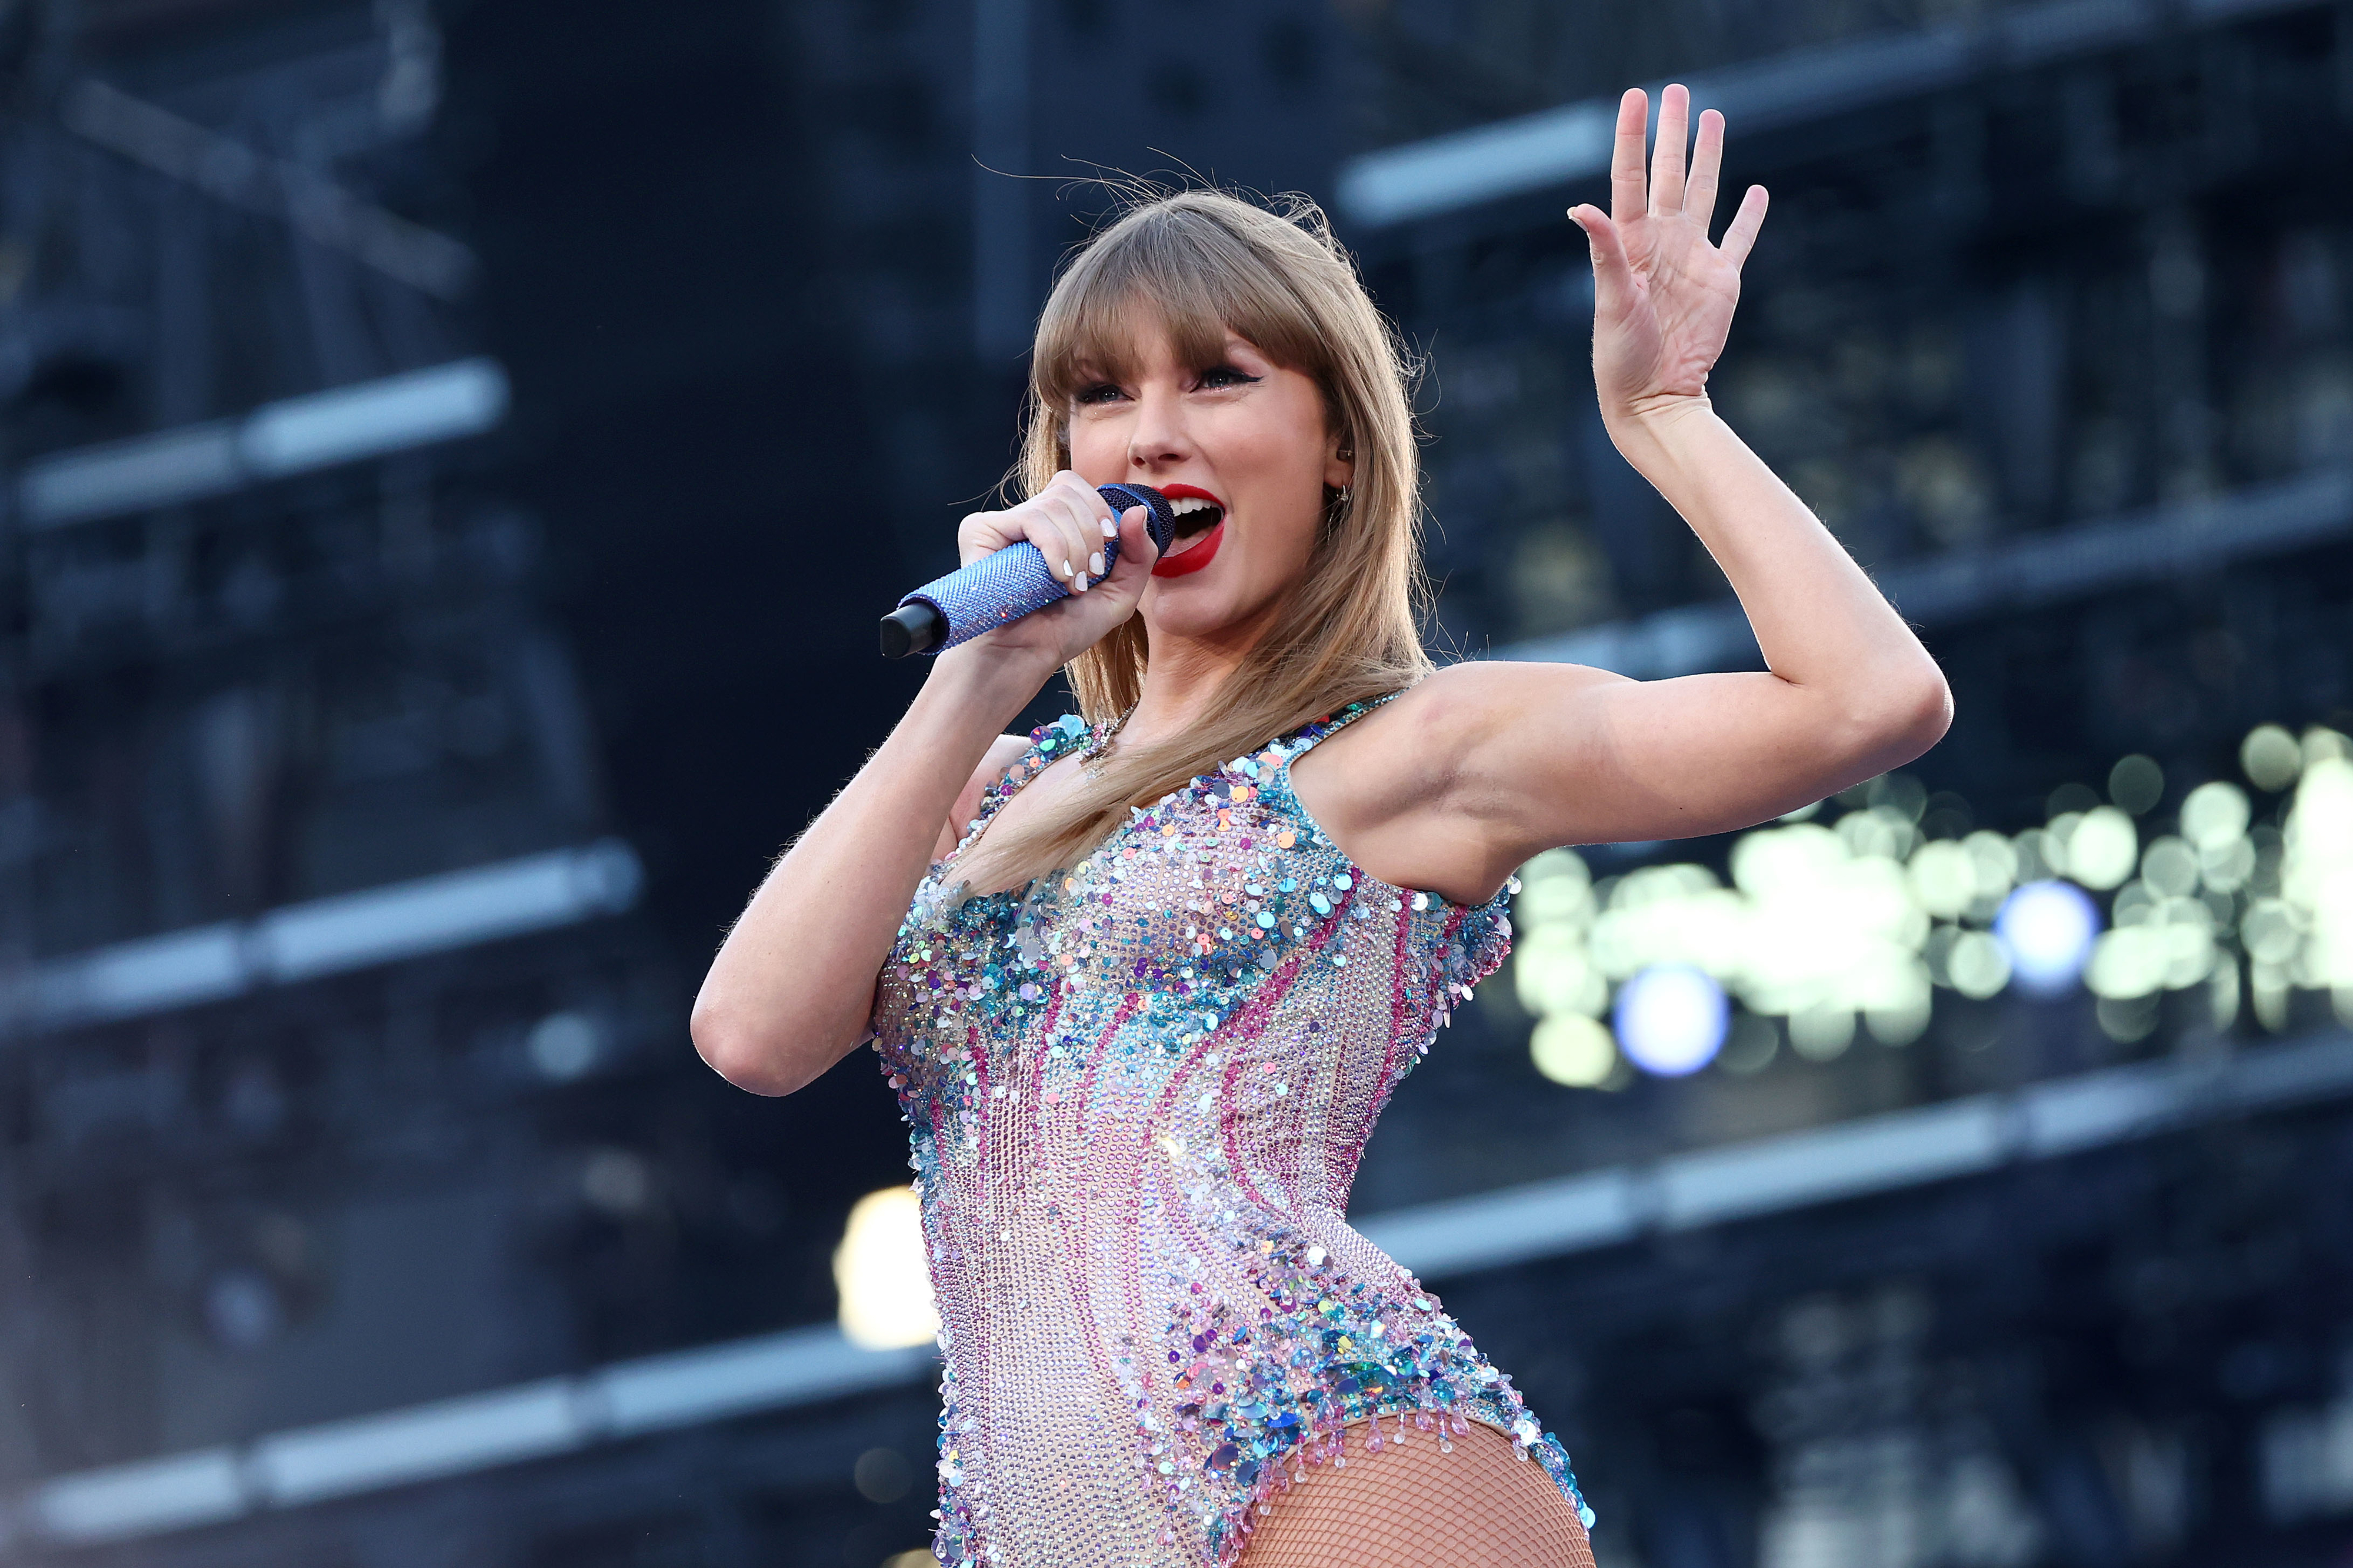 Taylor Swift in sparkling bodysuit singing on stage with microphone in hand